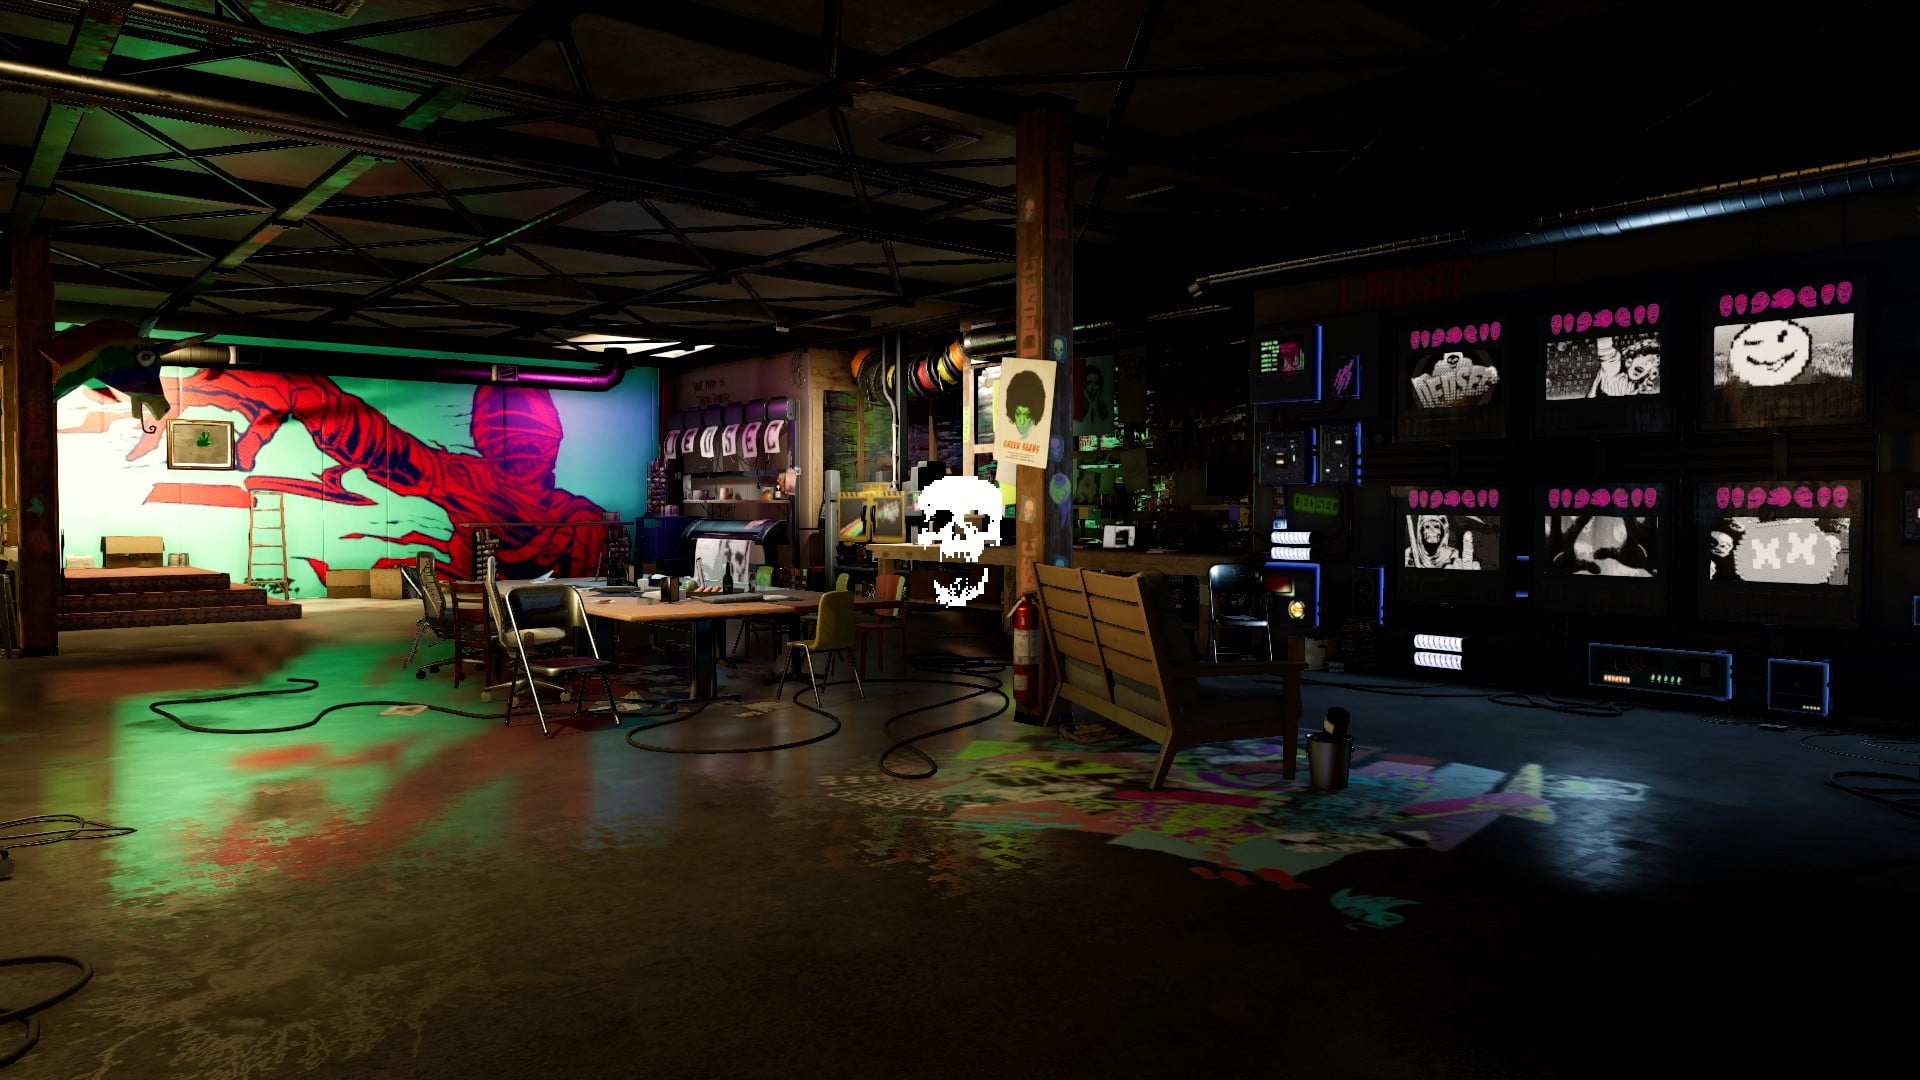 skull painting, Watch_Dogs, DEDSEC, Watch_Dogs 2, indoors, illuminated